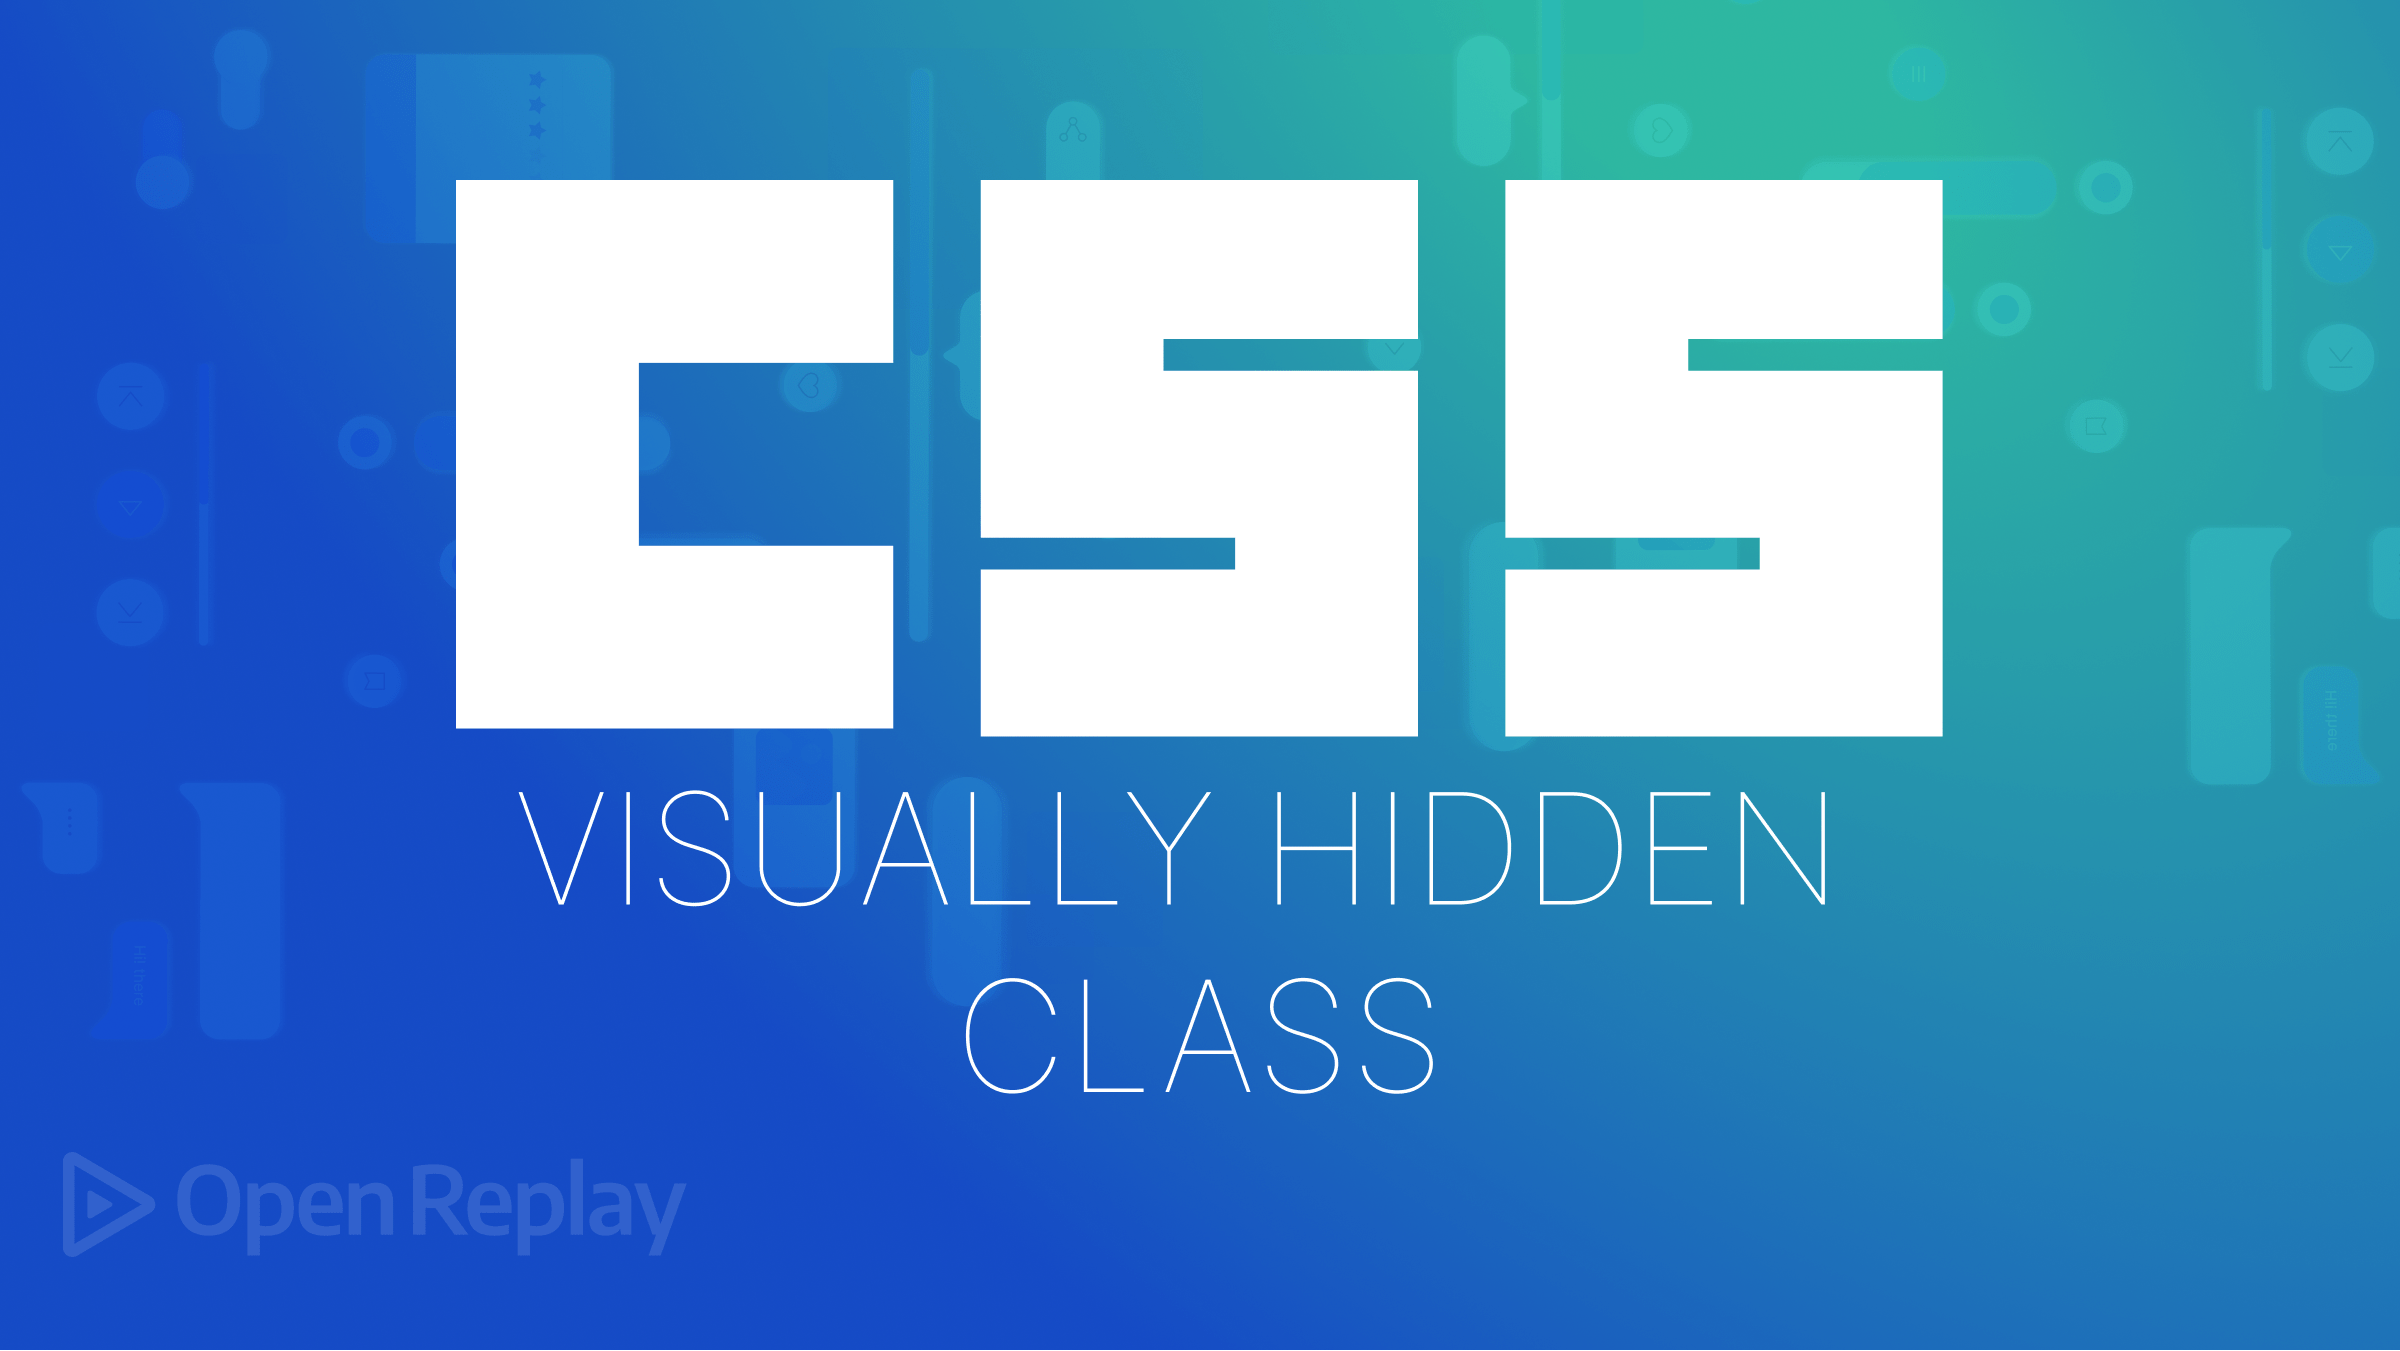 Accessibility, design, and the CSS visually-hidden class